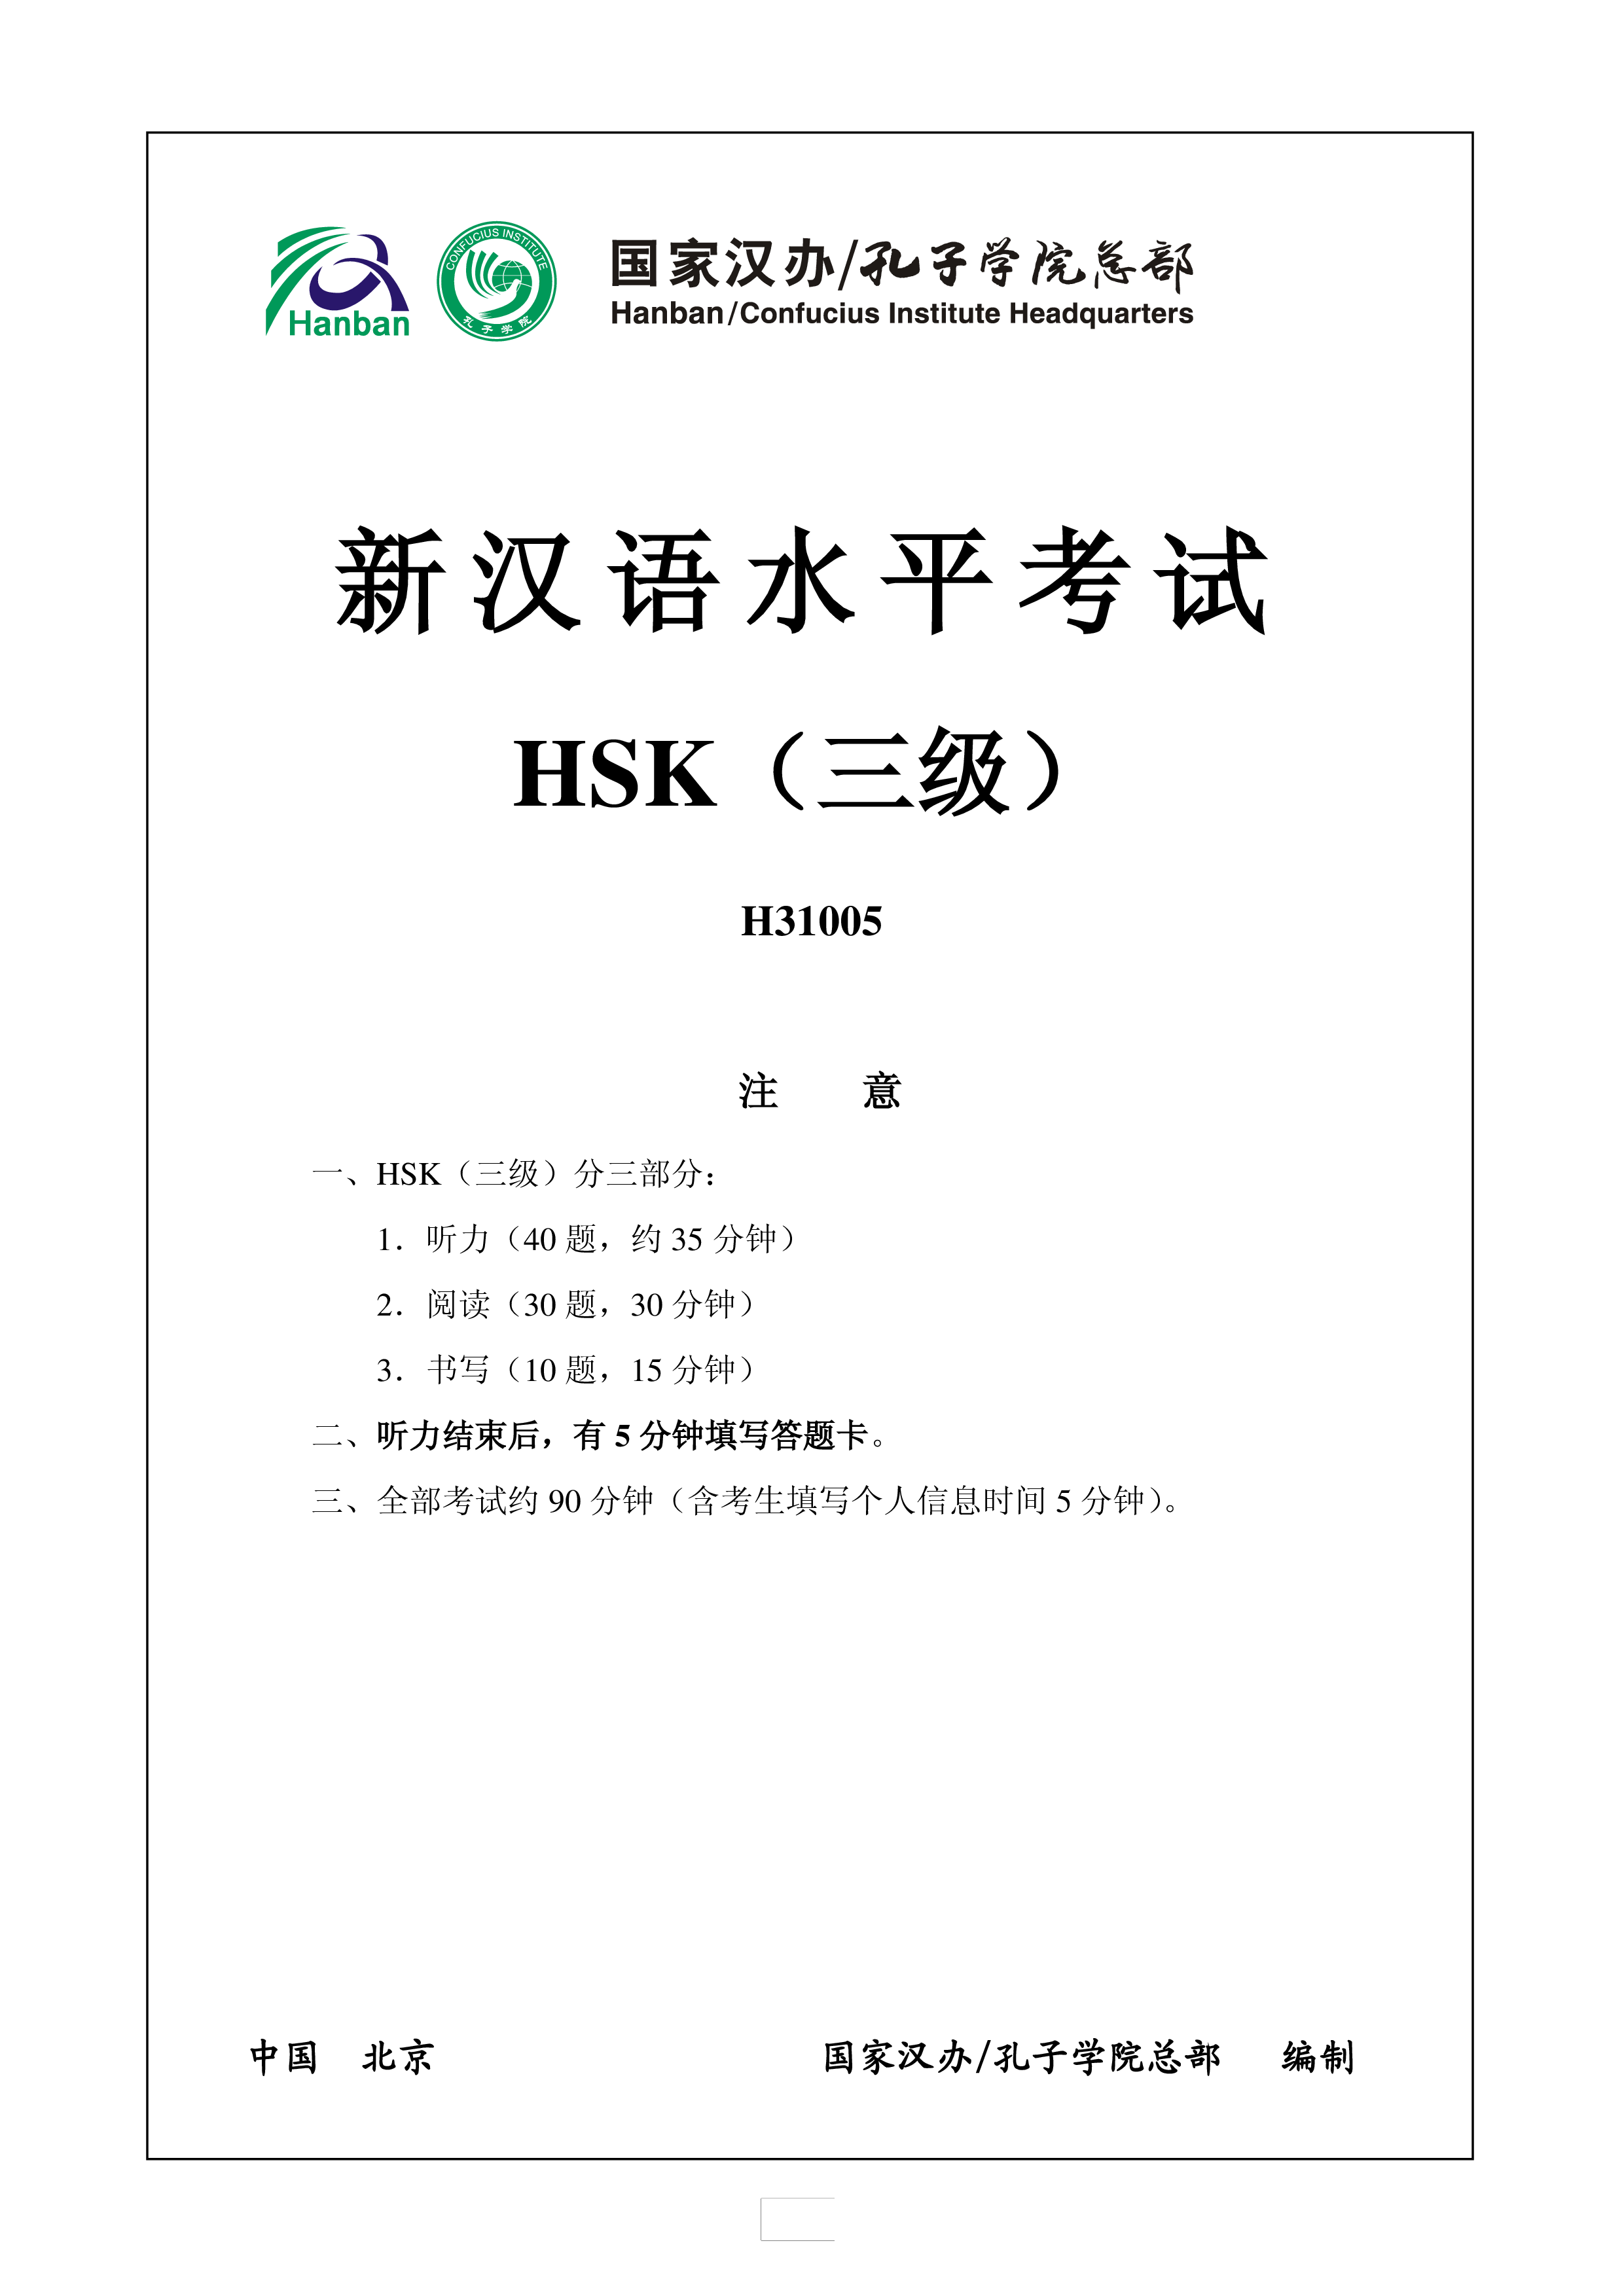 hsk3 chinese exam including answers # hsk3 h31005 voorbeeld afbeelding 